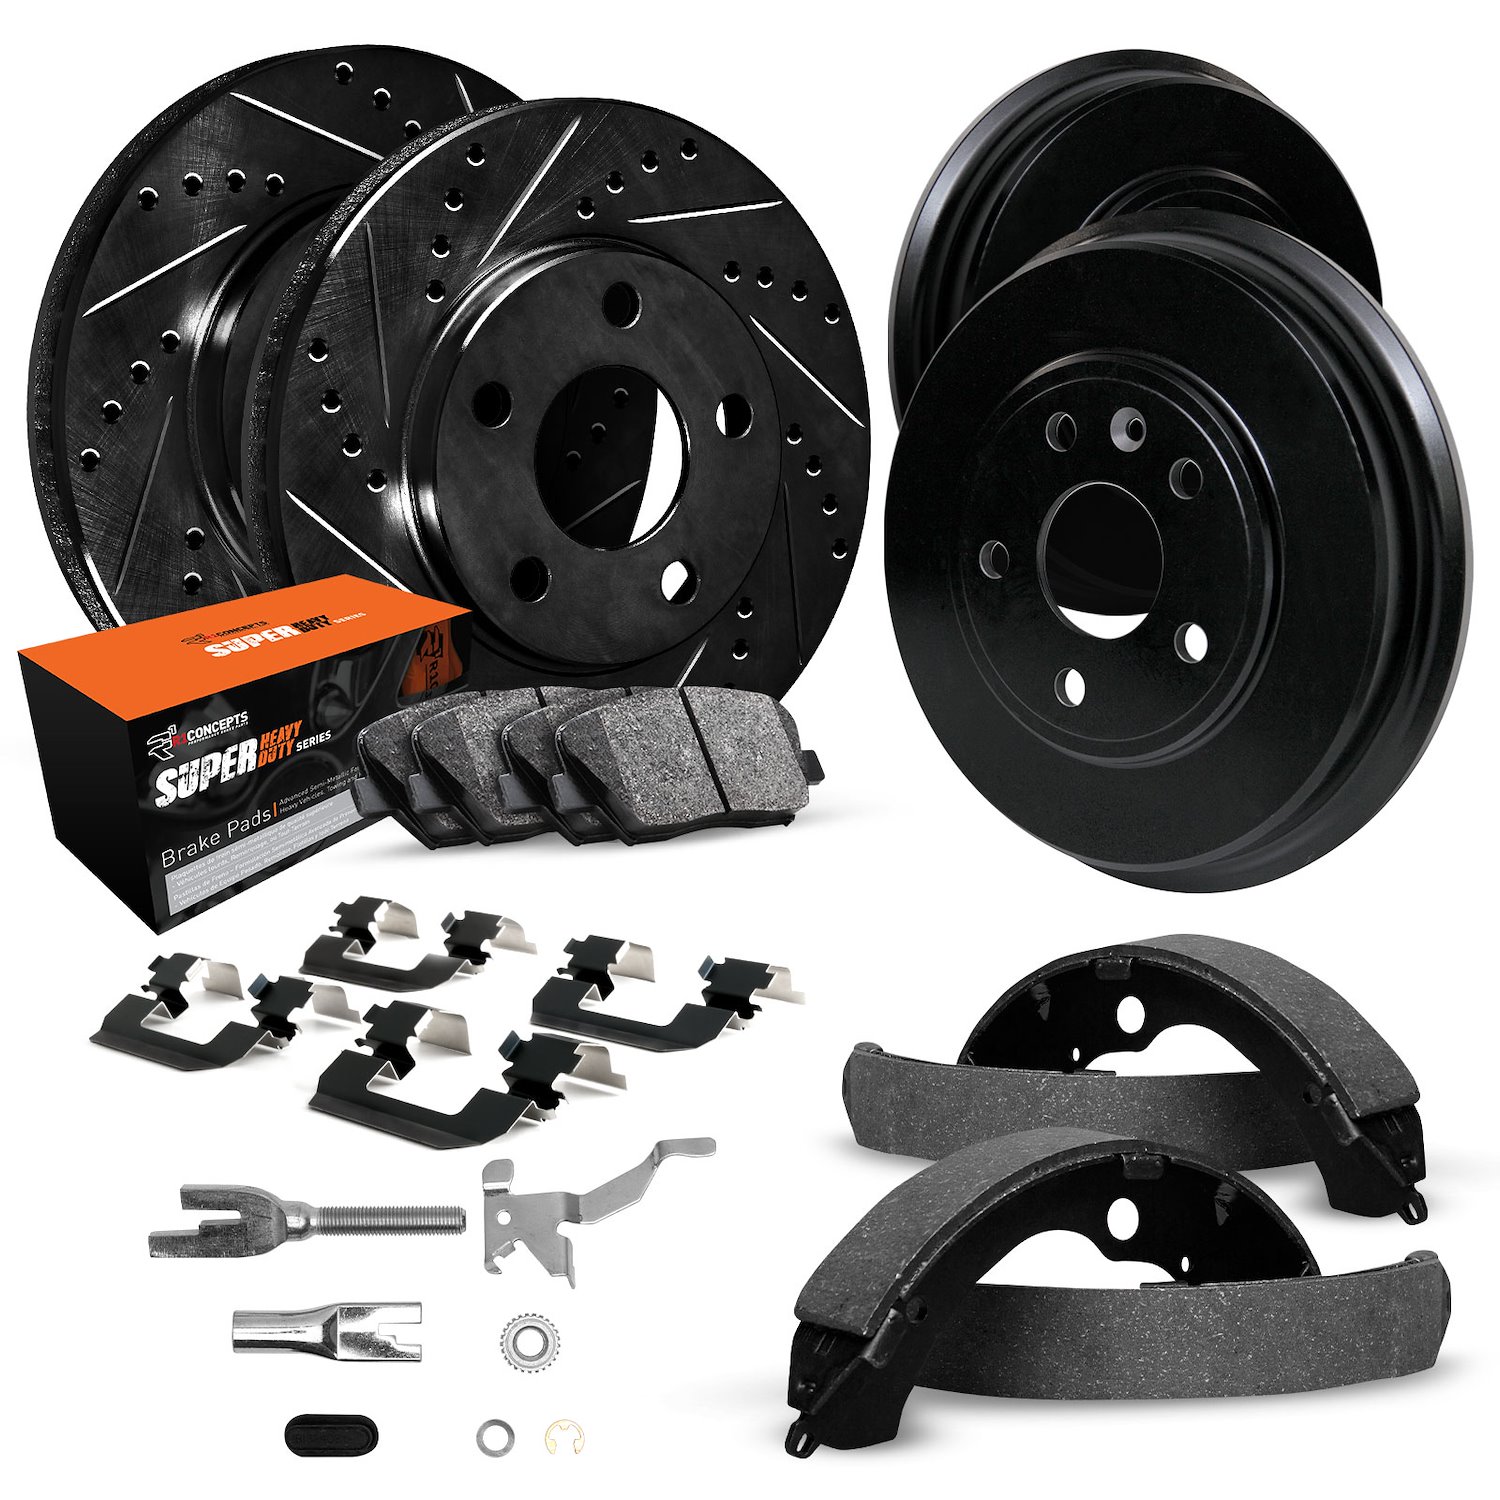 E-Line Drilled/Slotted Black Rotor & Drum Set w/Super-Duty Pads, Shoes, Hardware/Adjusters, 1985-1999 GM